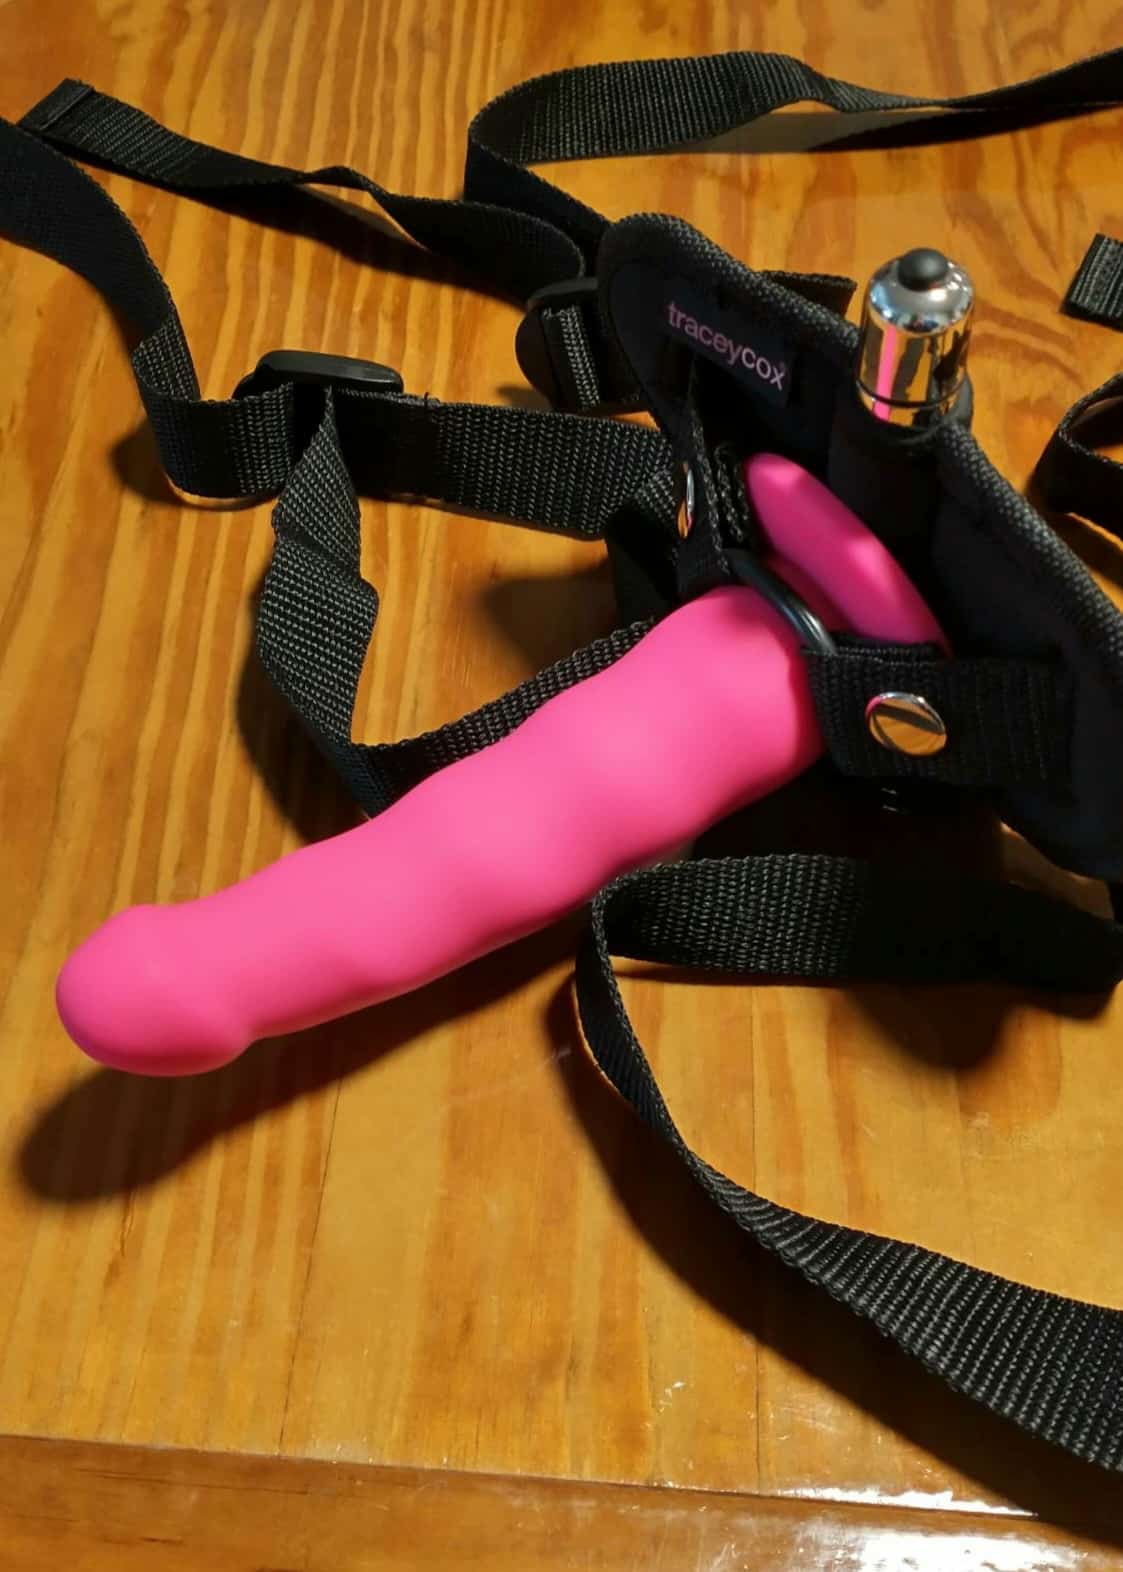 Tracey Cox Supersex Strap-On Pegging Kit. Slide 5